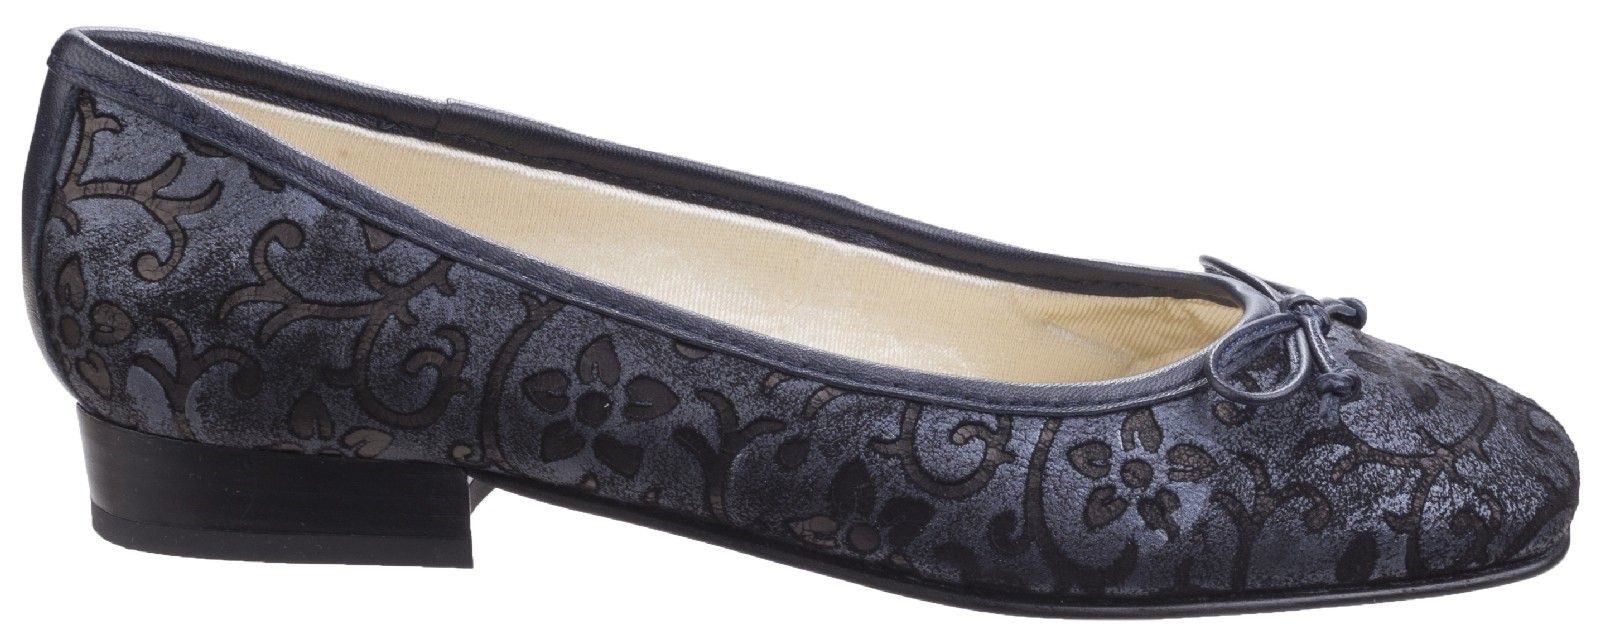 Riva brings in a twist to the traditional ballet with this regal embossed floral print court shoe.  A square toe gives a dynamic feel to your day to evening wear. Luxury metallic leather upper with embossed print. 
Gently padded soft textile lining. 
Smooth leather rim with leather bow. 
Cushioned leather footbed. 
Square front toe.